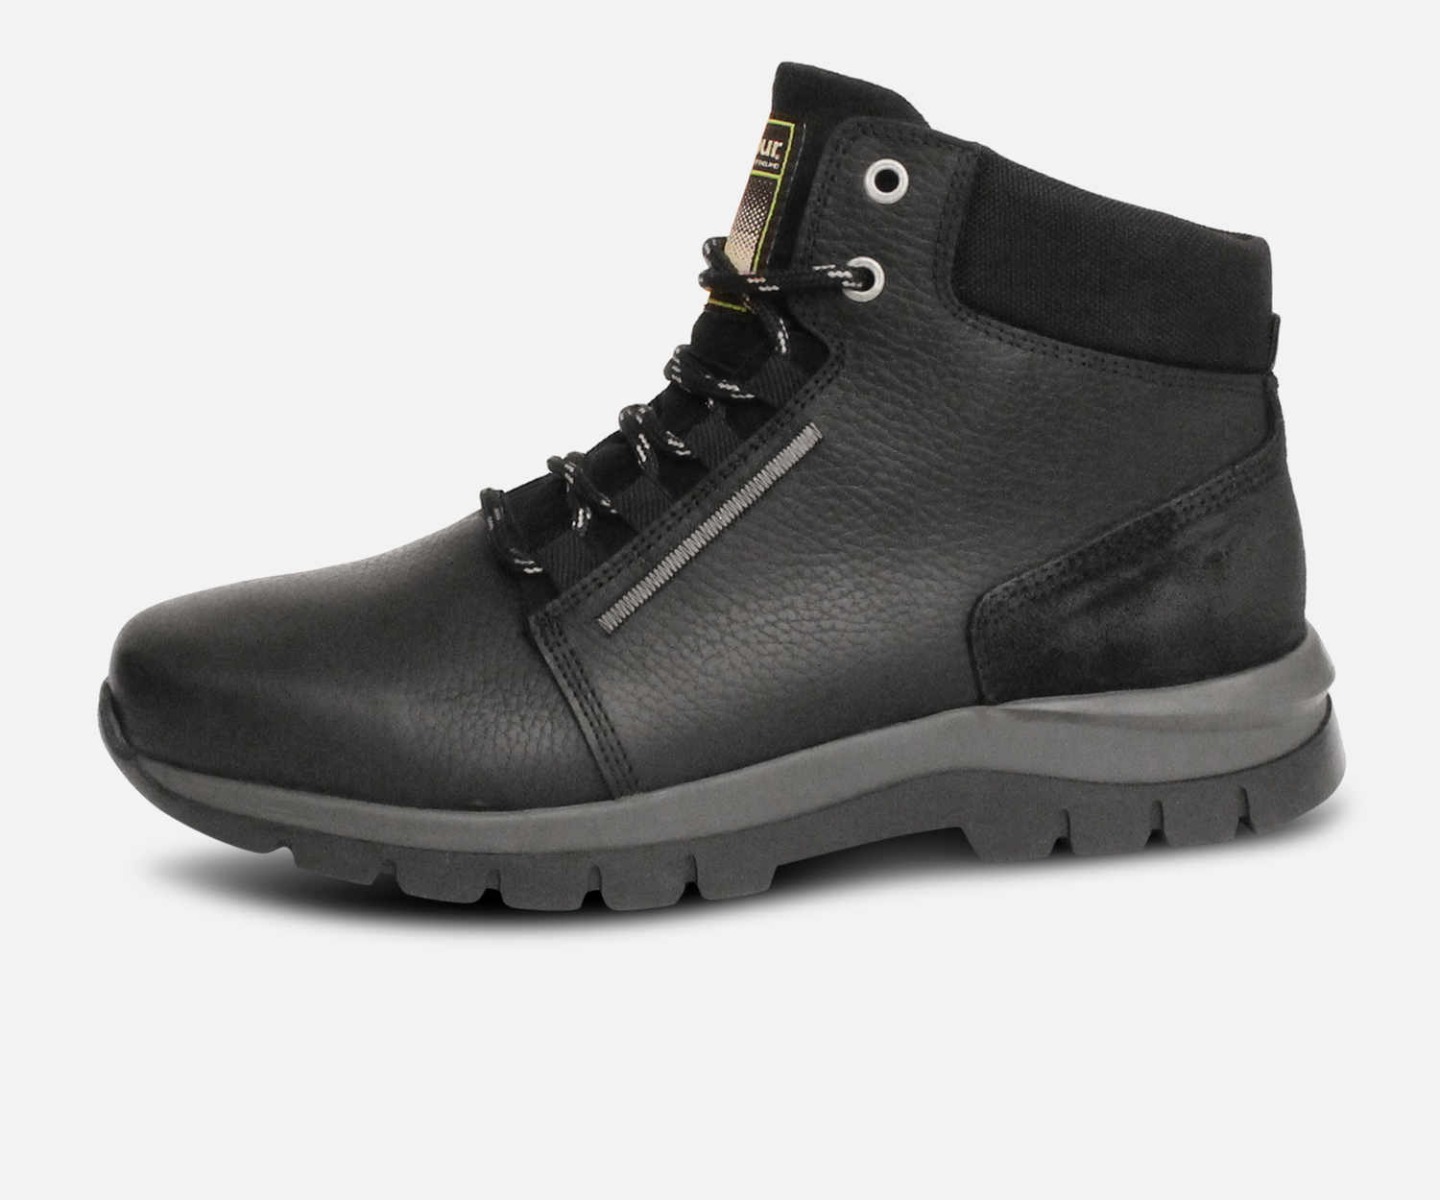 Barbour Orlando Outdoor Walking Boots in Black Leather